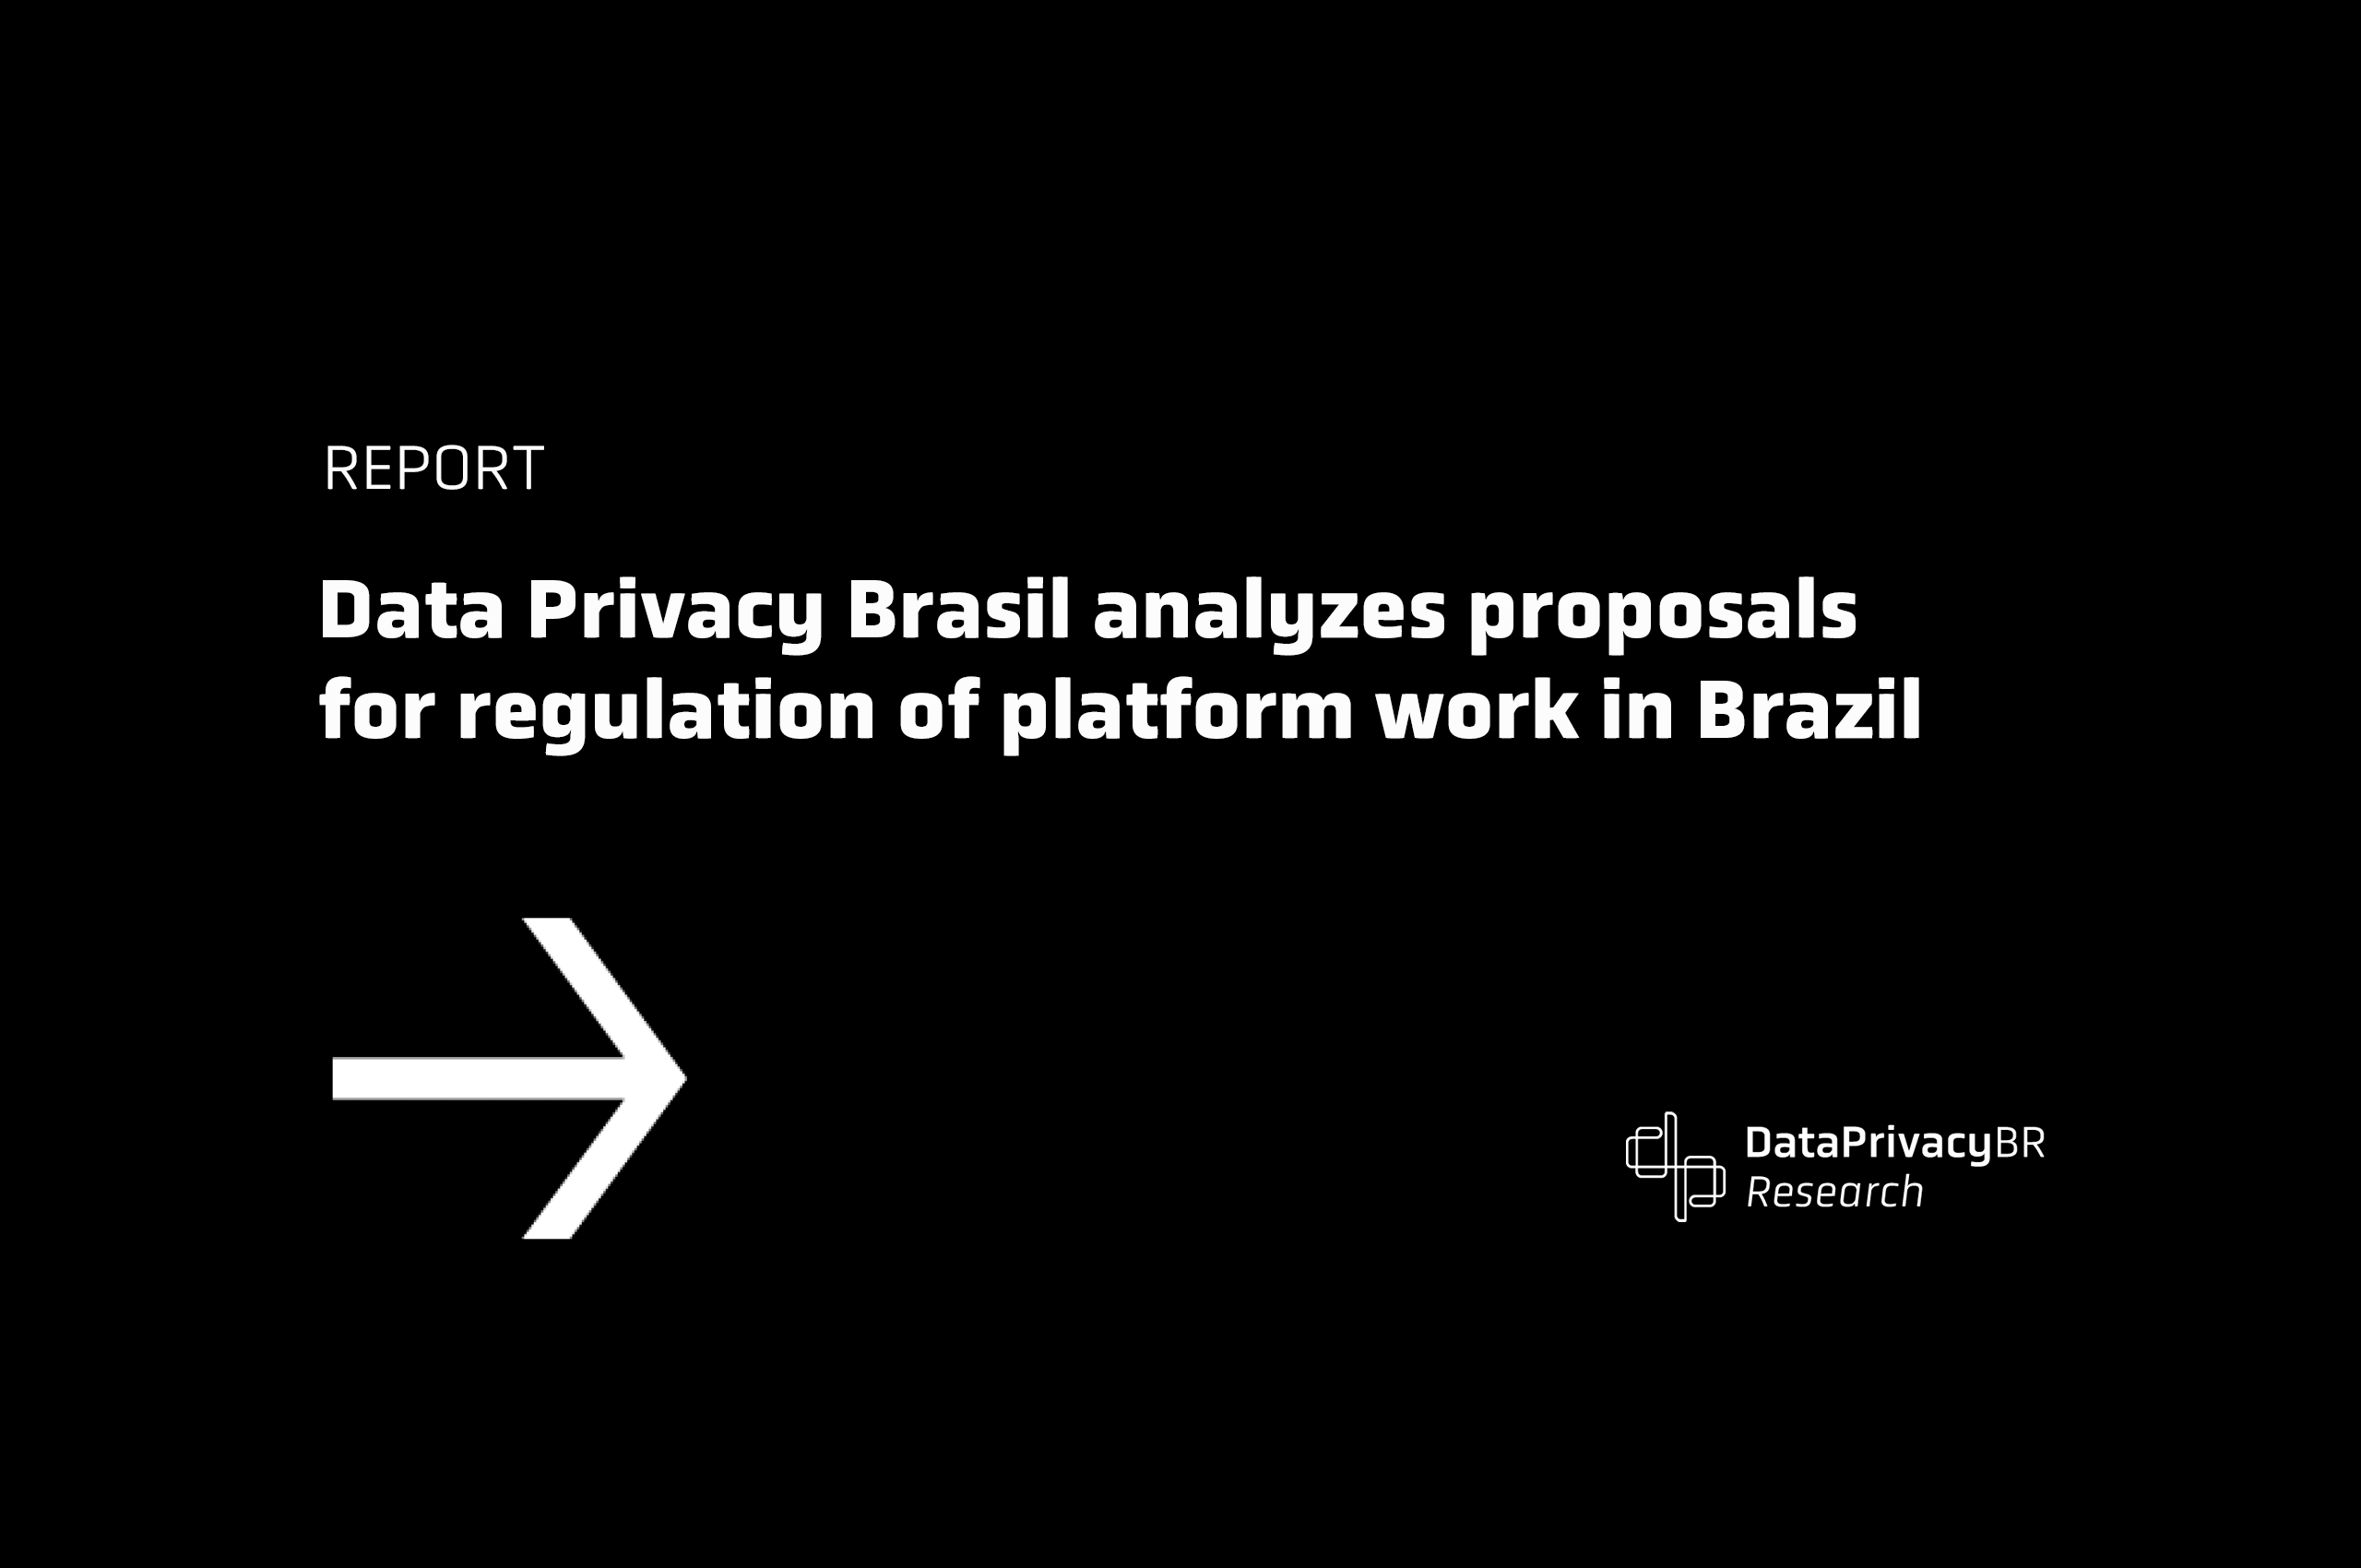 Emerging trends in the regulation of platform work in Brazil: a preliminary report